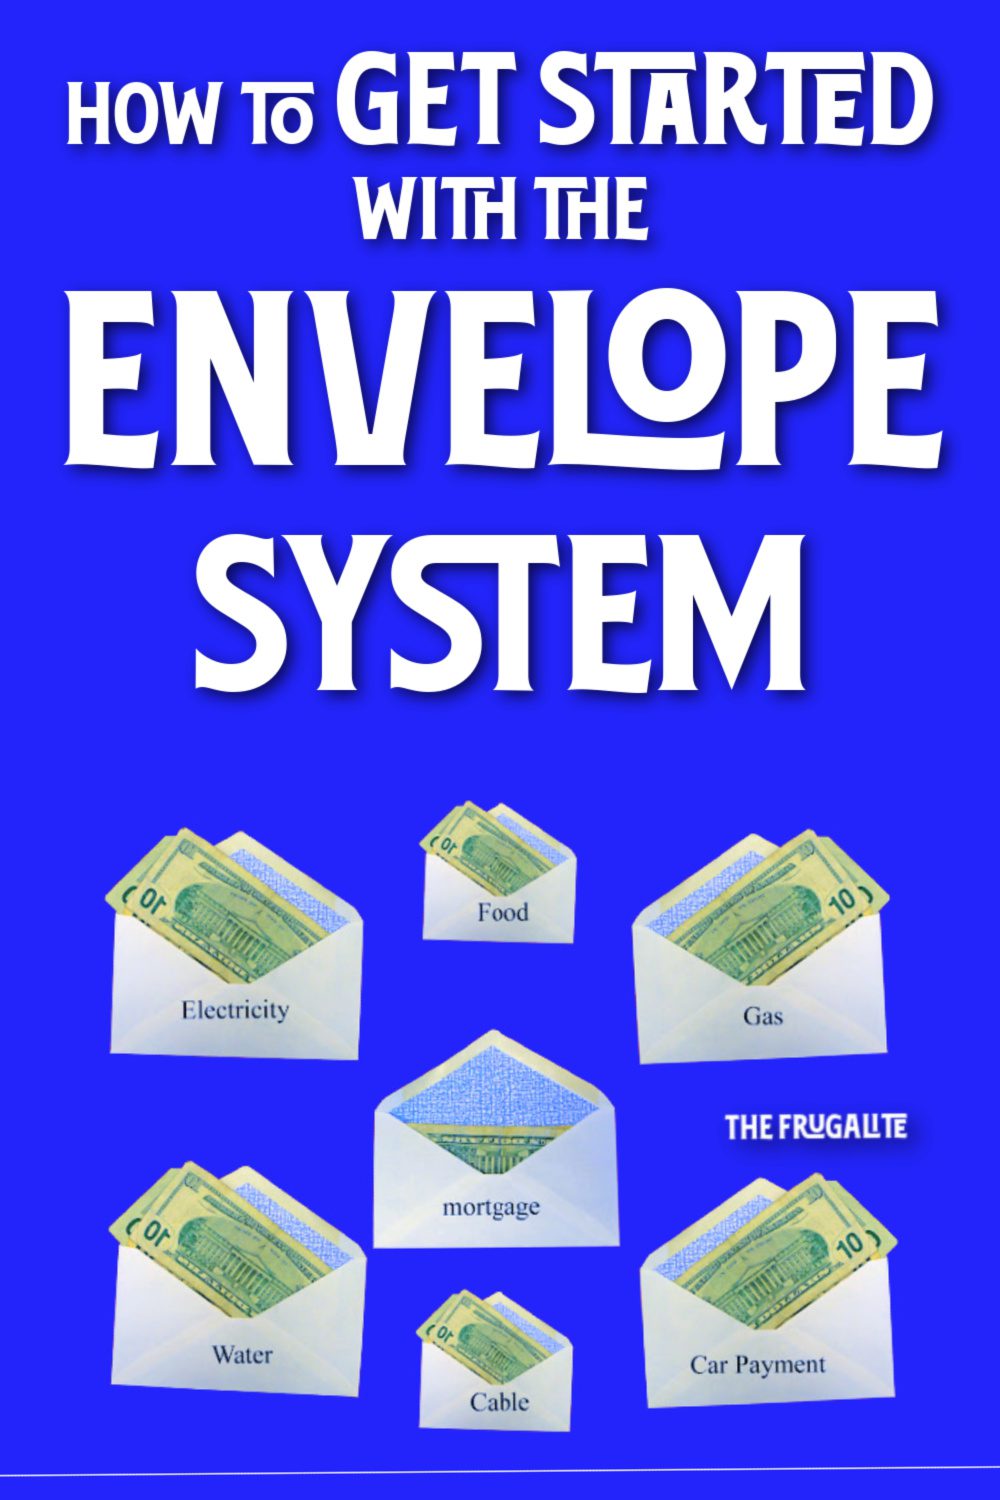 How to Get Started with the Envelope System